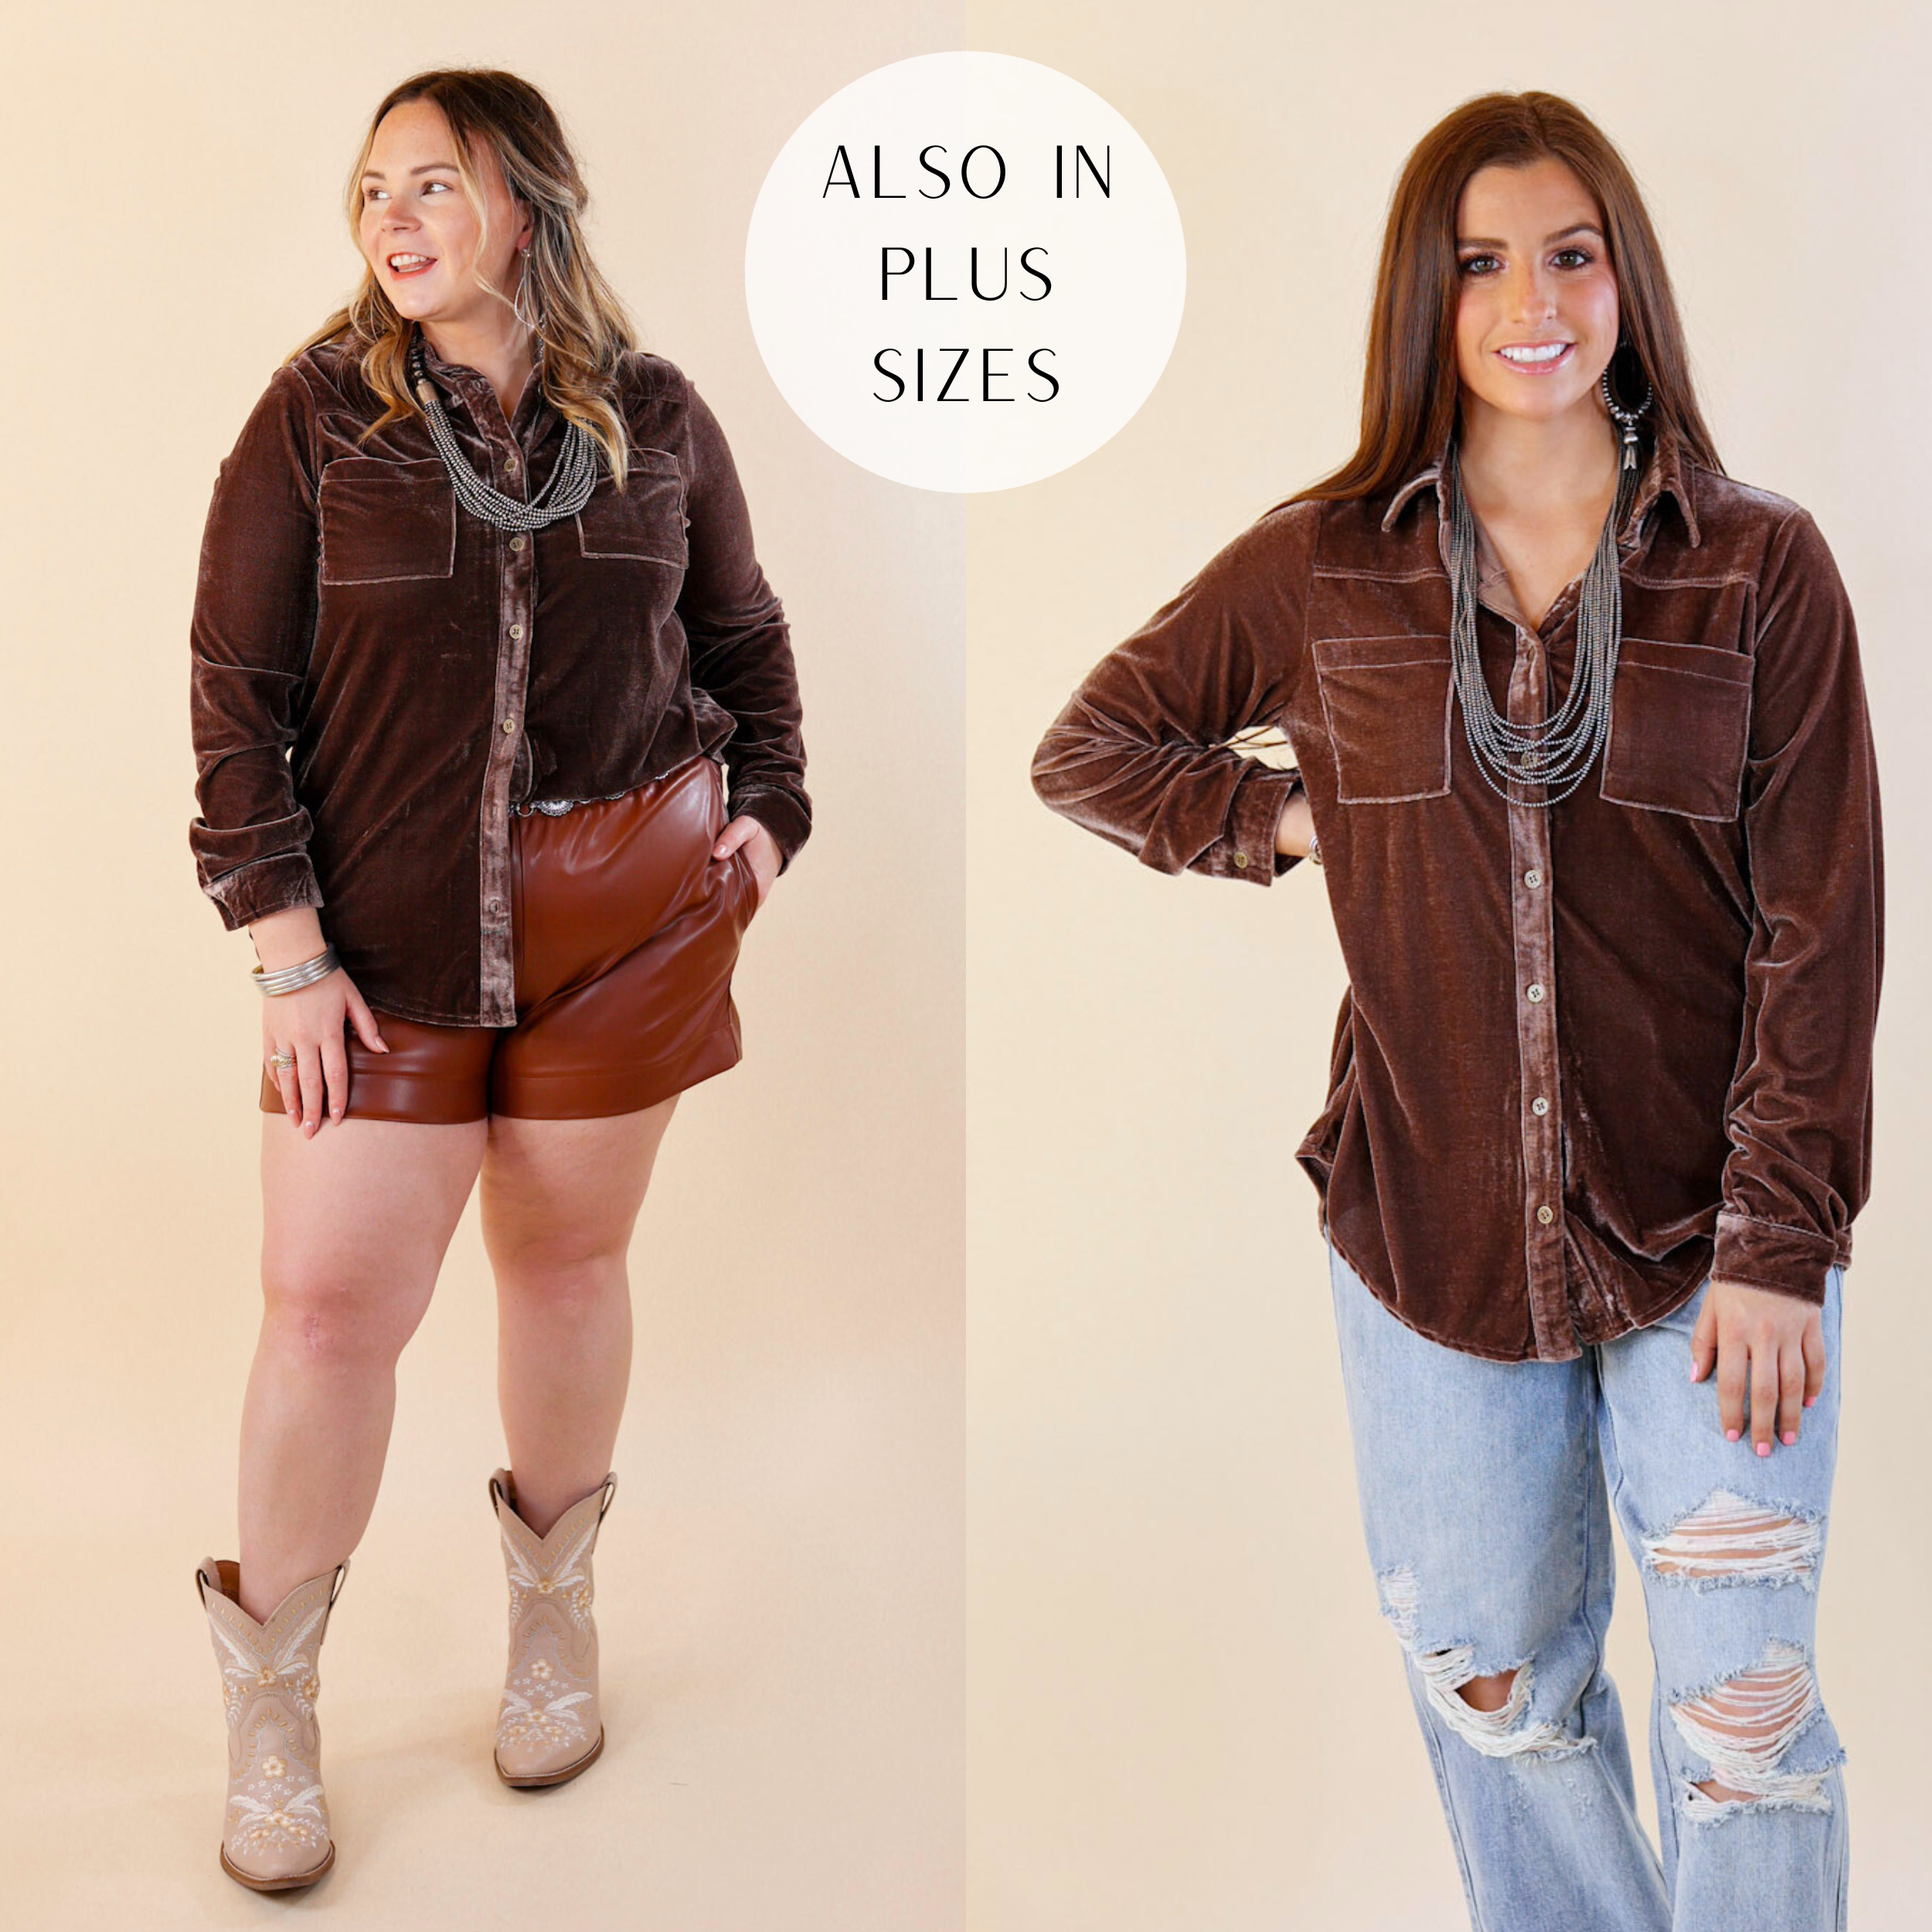 Model are wearing a velvet long sleeve blouse. Size large model has it paired with leather shorts and tan boots. Small model has it paired with light wash jeans and silver jewelry.